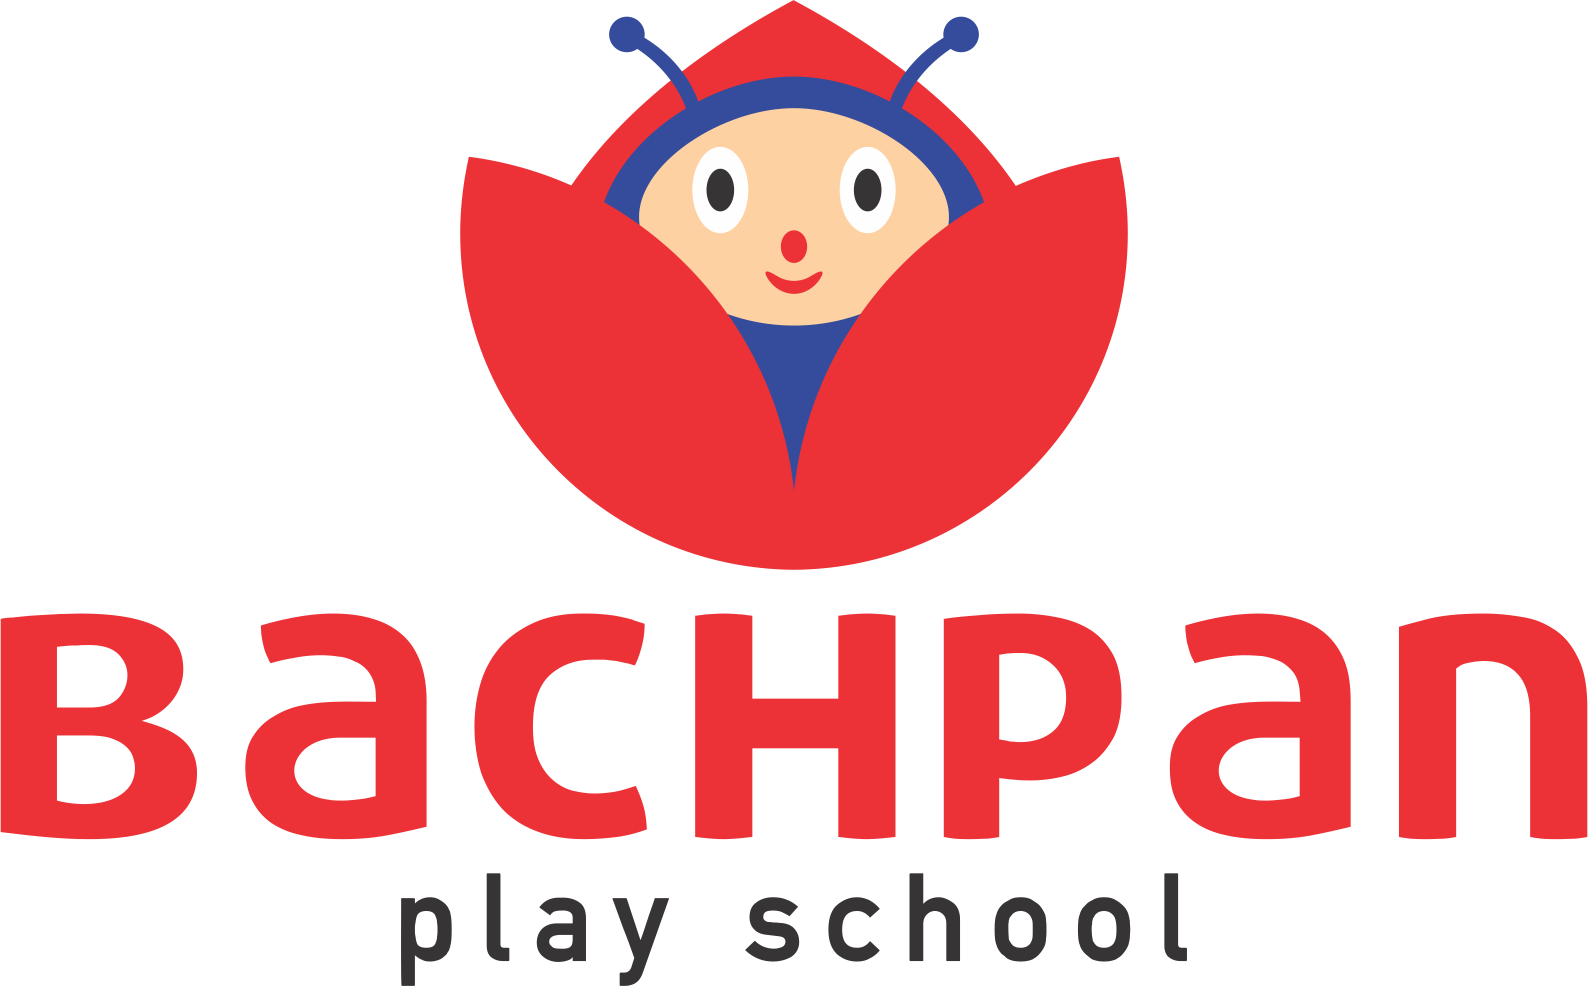 Bachpan A Play School|Coaching Institute|Education